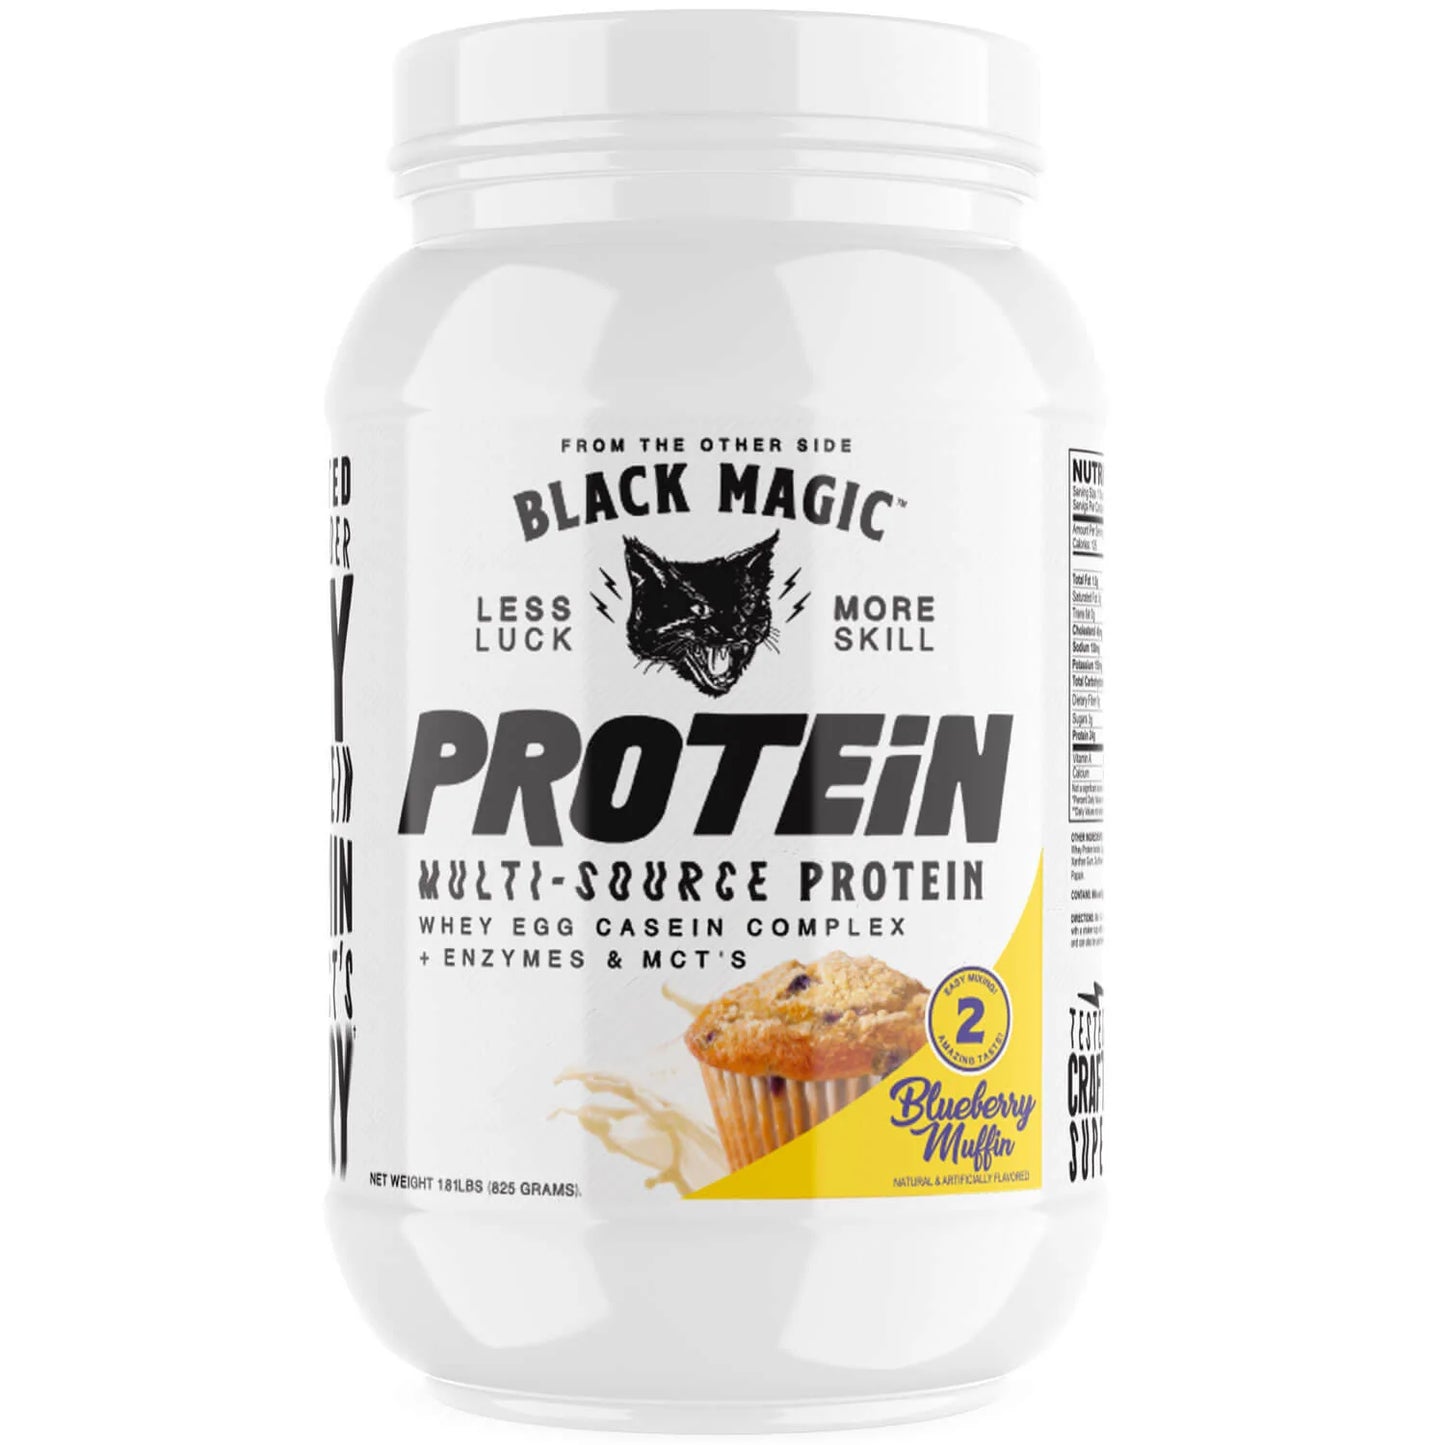 Black Magic Handcrafted Multi-Source Protein Blueberry Muffin